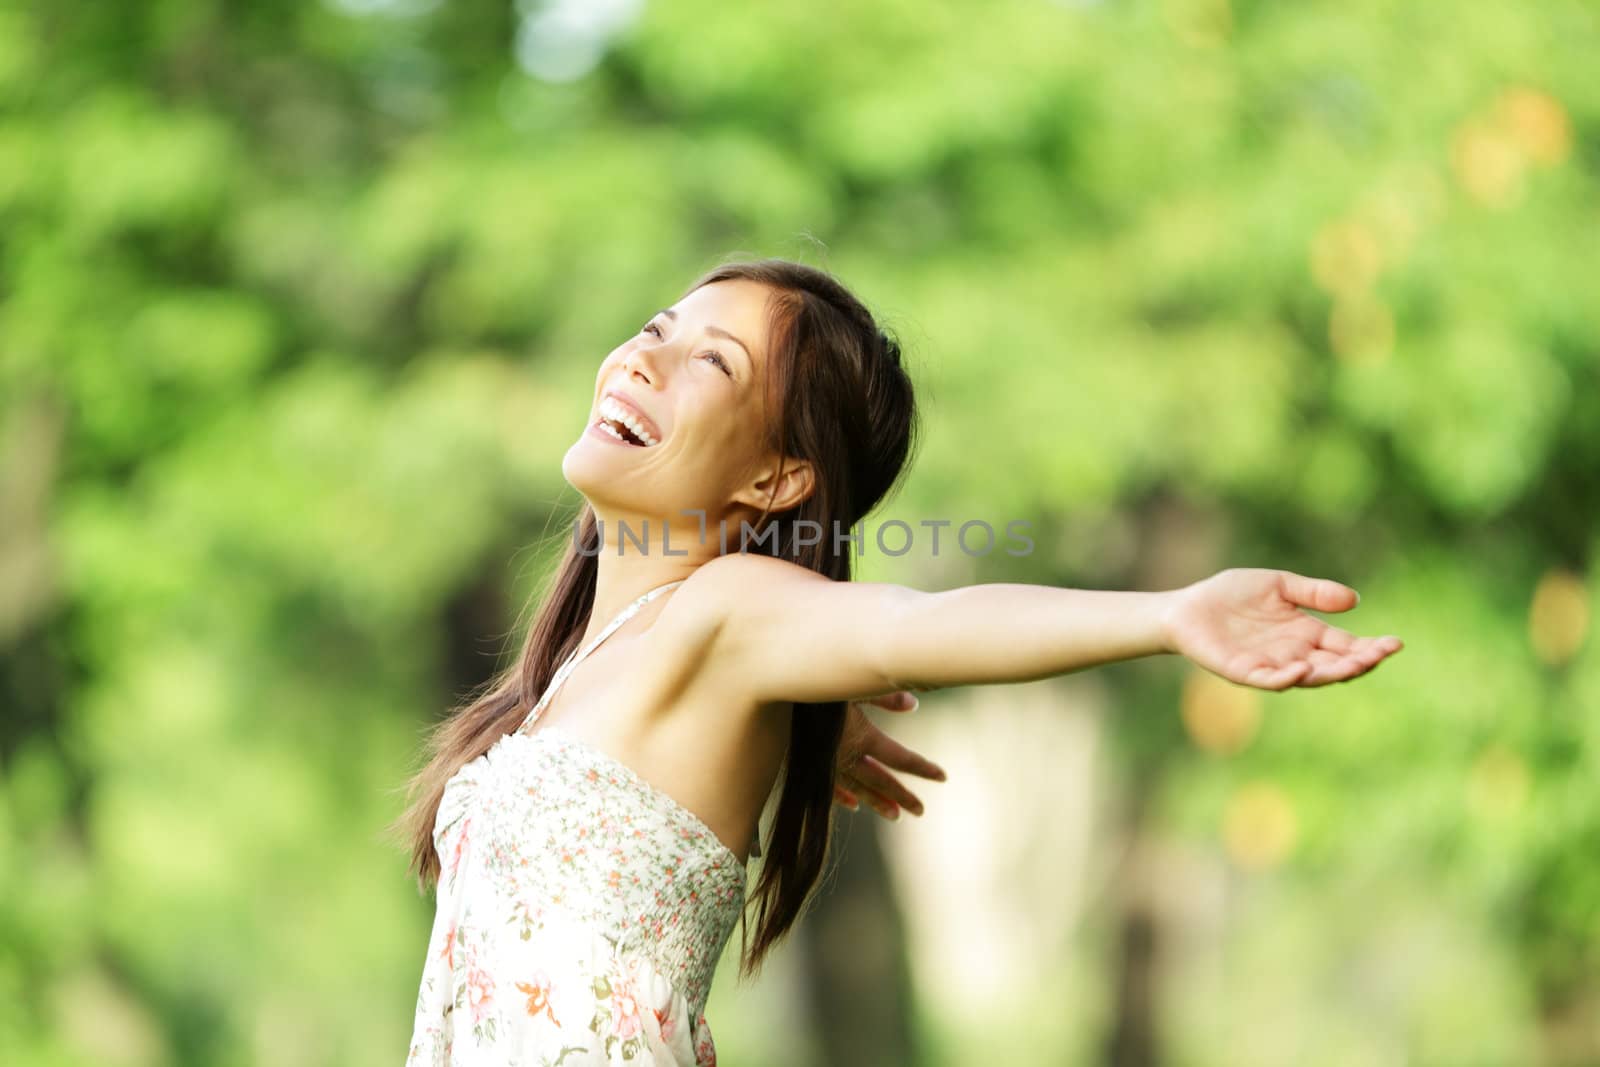 Happy woman in spring / summer smiling carefree and joyful in summer dress in beautiful park. Aspirational freedom concept with beautiful mixed race asian / caucasian girl